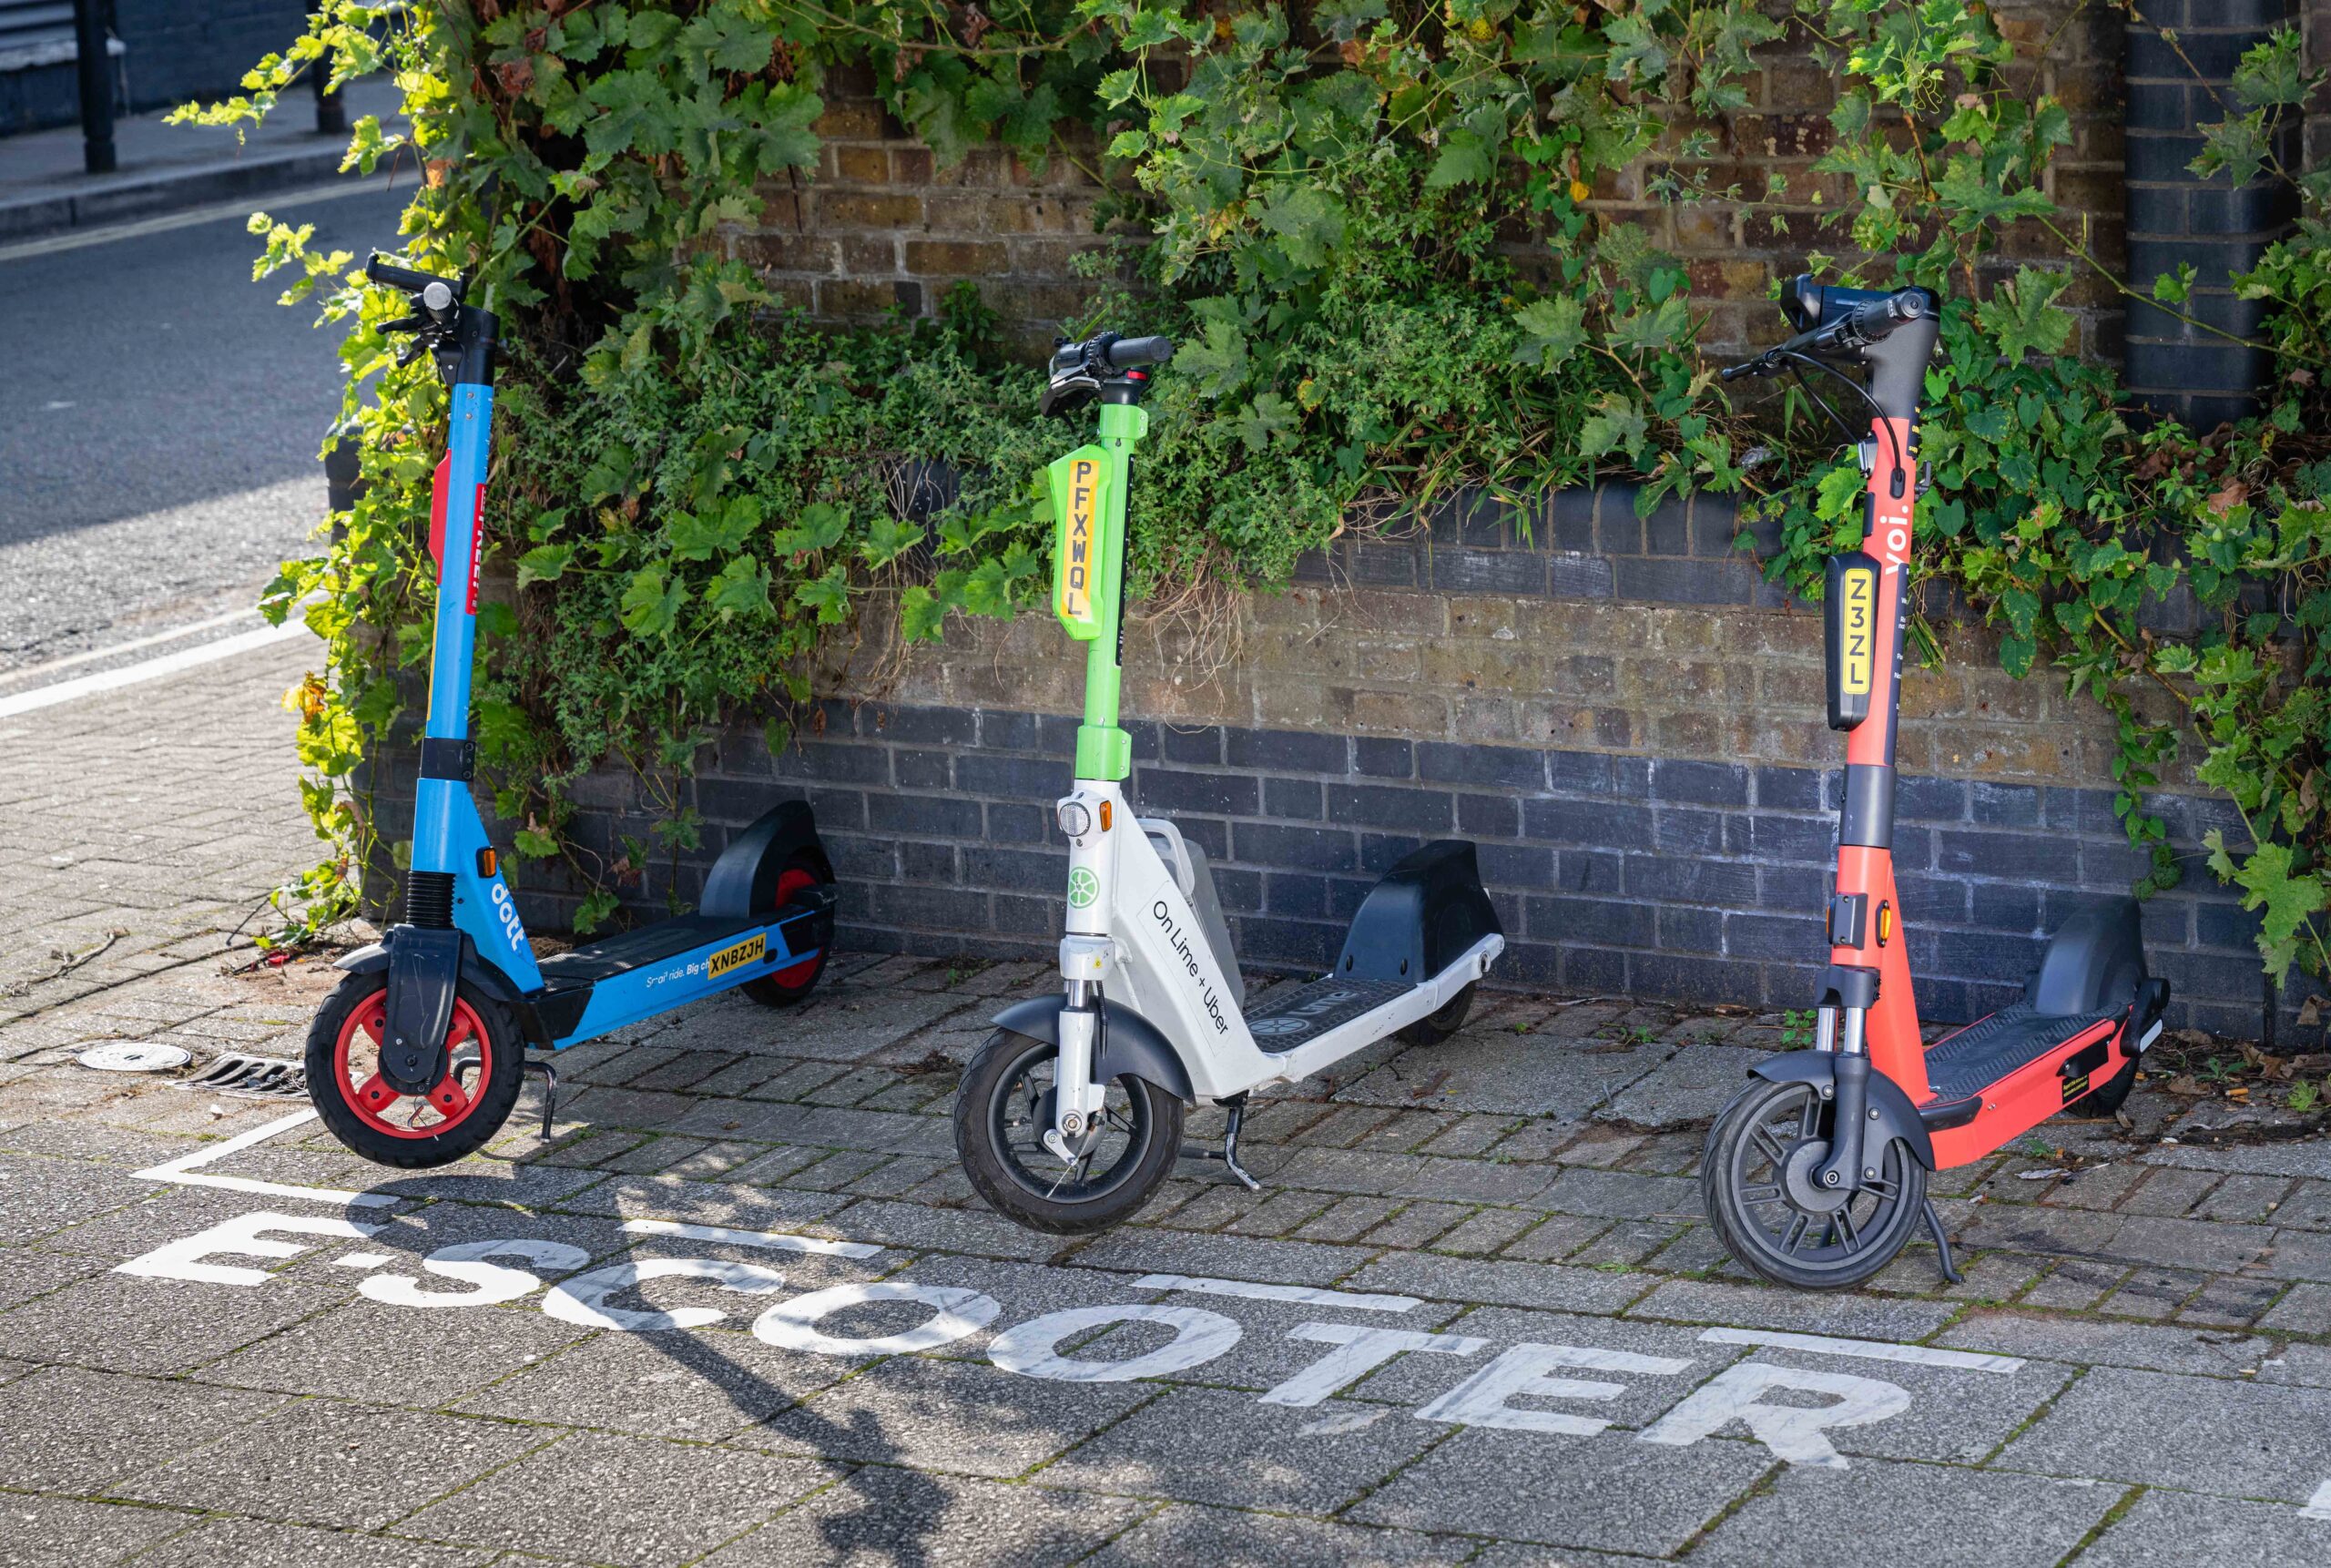 Groundbreaking e-scooter study shows surface transitions as most